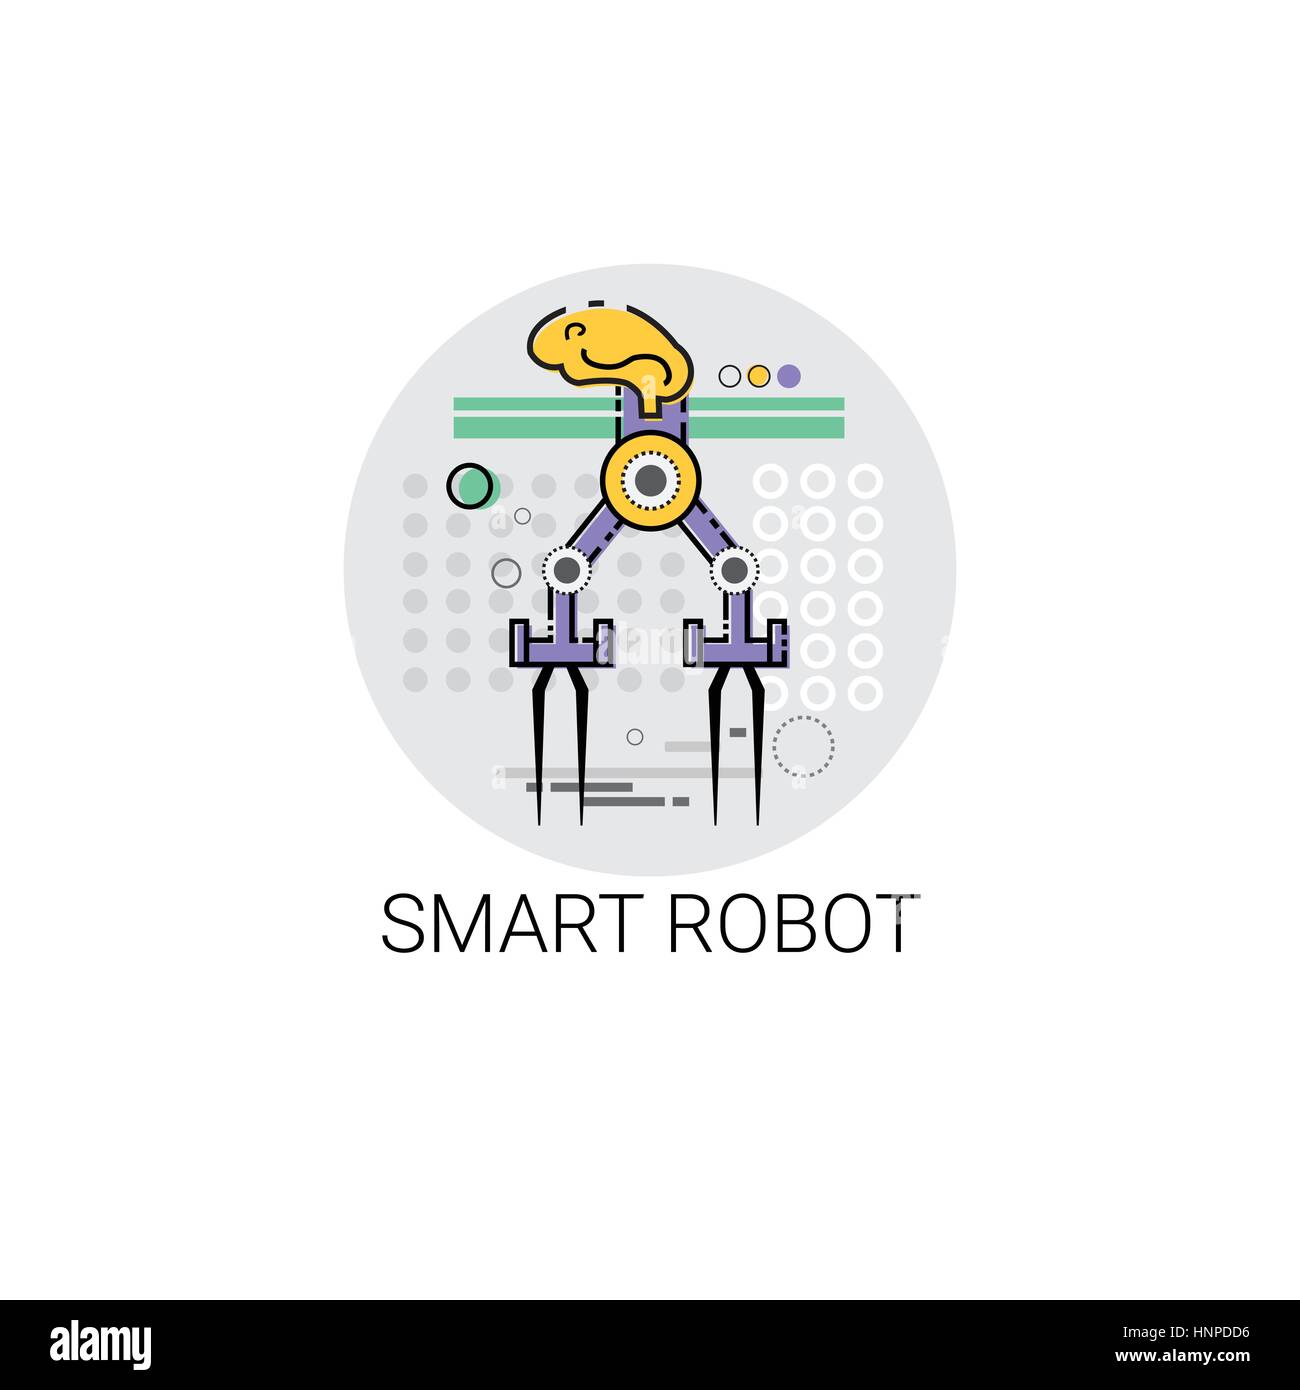 Smart Robot Machinery Industrial Automation Industry Production Icon Stock Vector